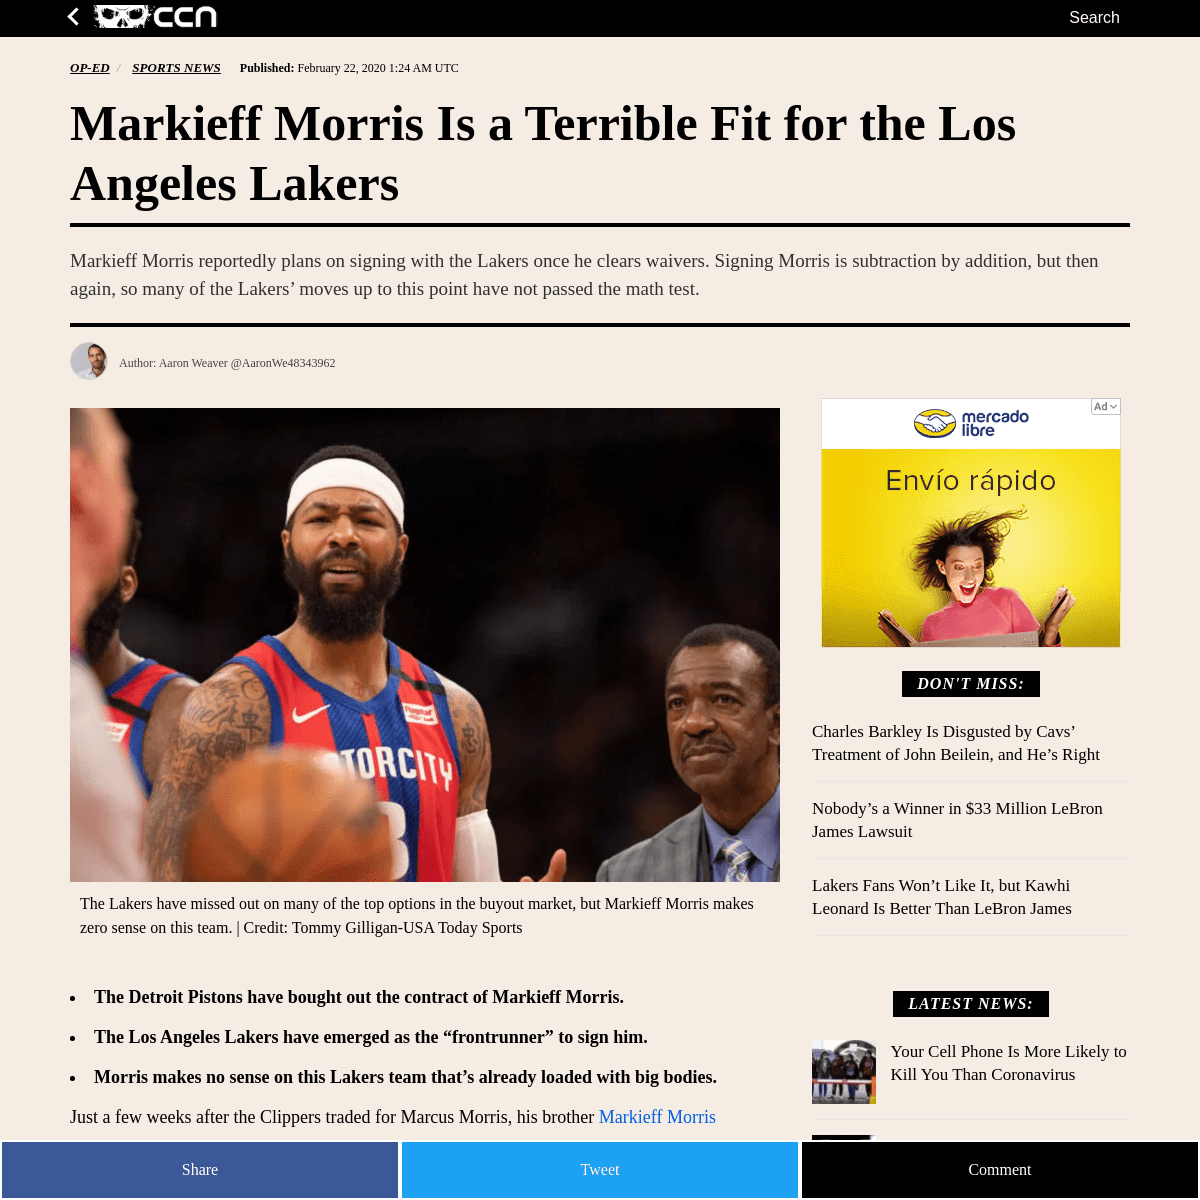 A complete backup of www.ccn.com/markieff-morris-is-a-terrible-fit-for-the-los-angeles-lakers/